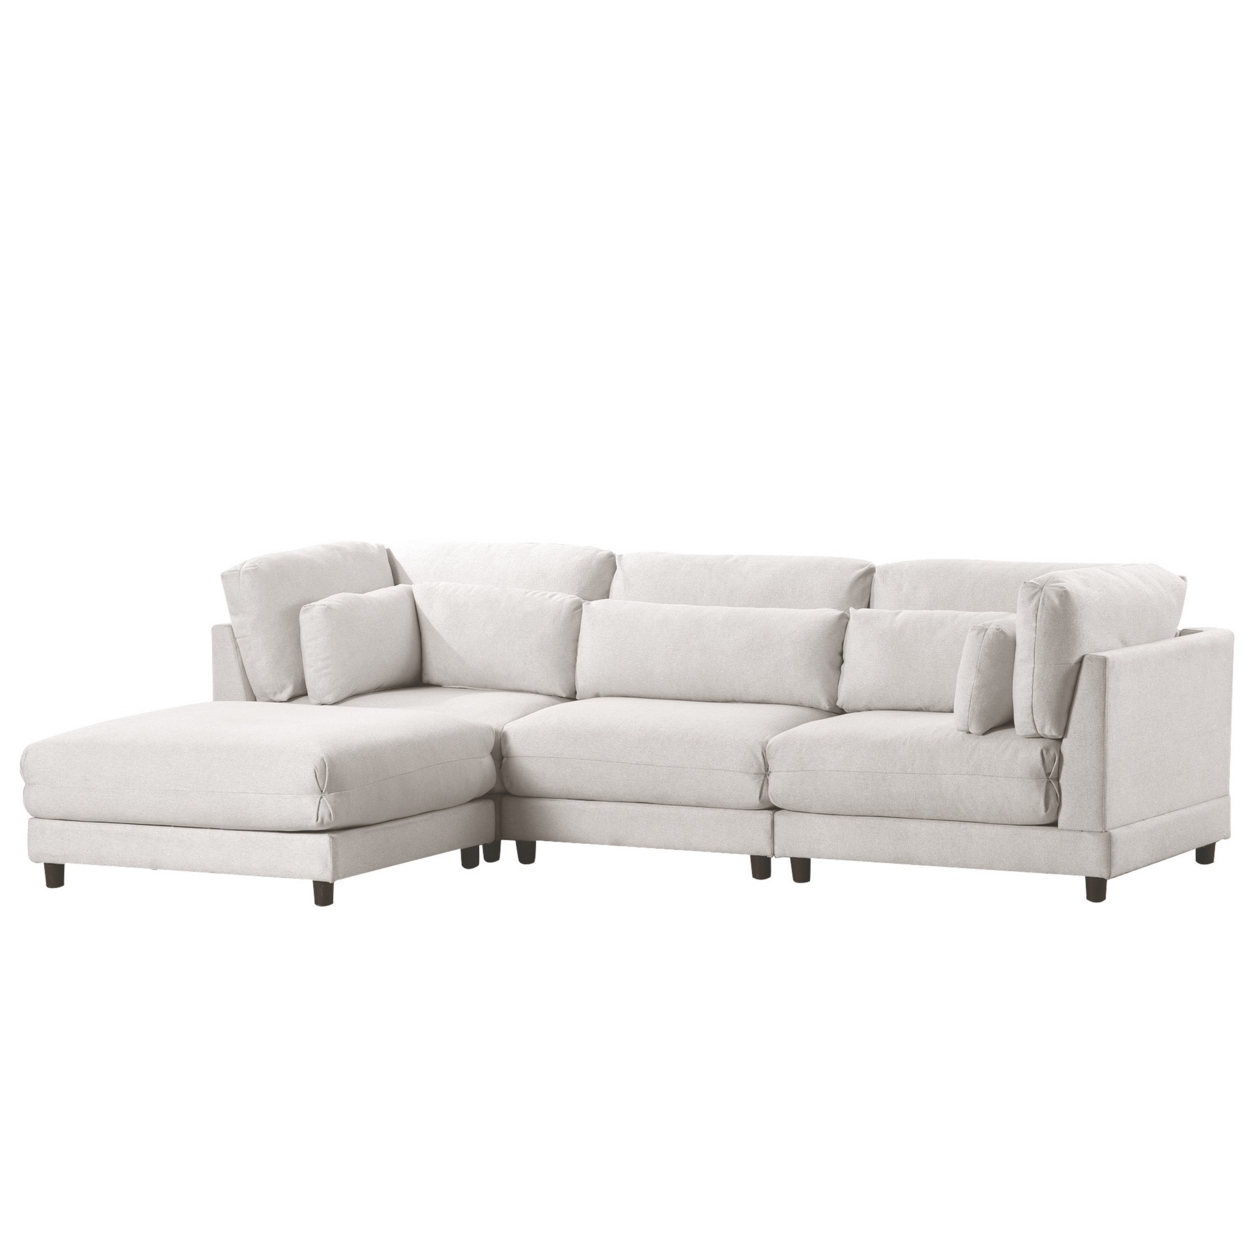 Modern 2 Piece L Shaped Sectional Sofa Set With Chaise, Beige Upholstery- Saltoro Sherpi